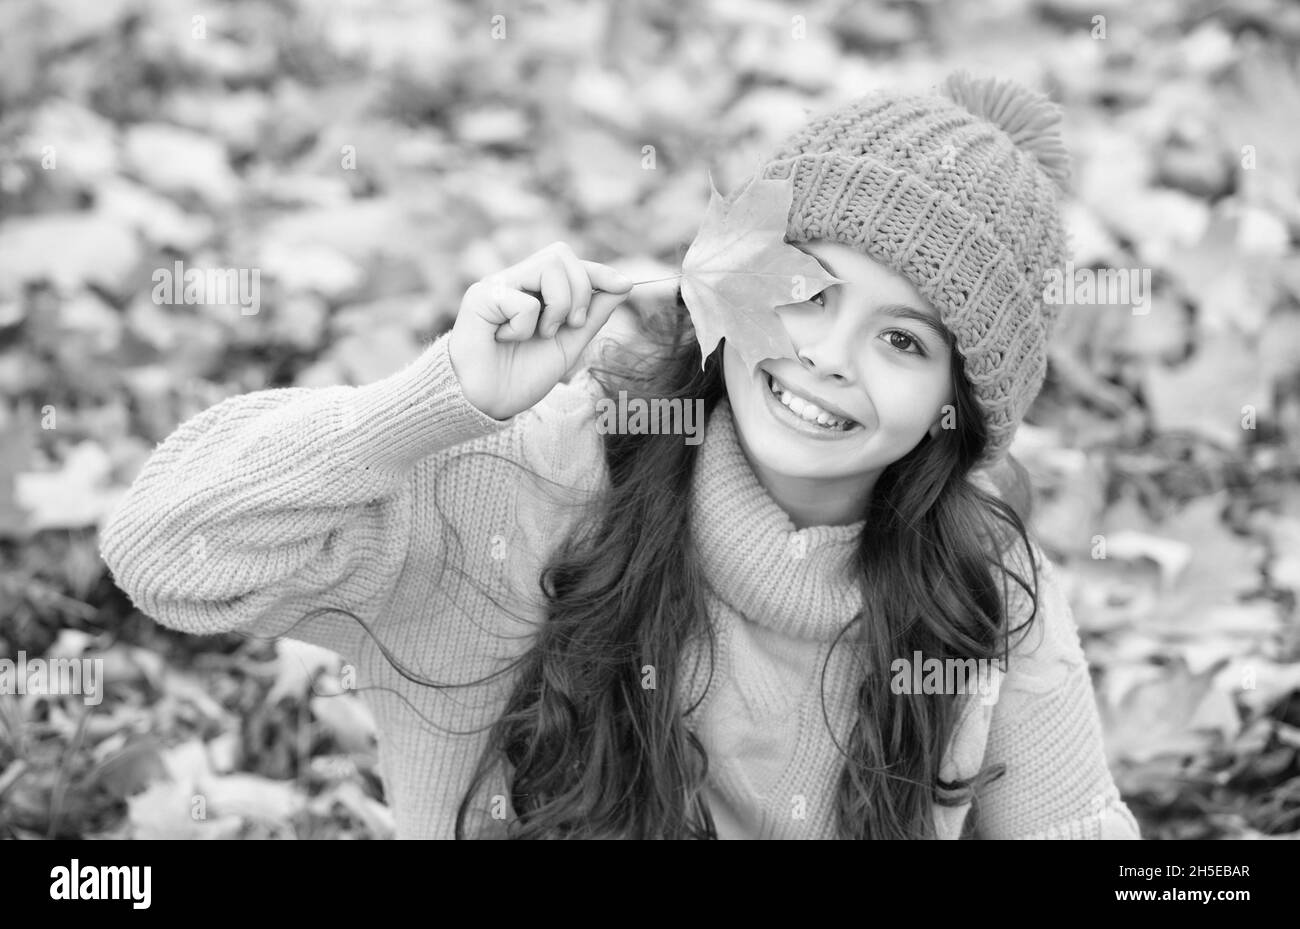 perfect autumn day of cheerful girl in knitted hat and sweater relax in fall season forest enjoying good weather, autumn fun Stock Photo